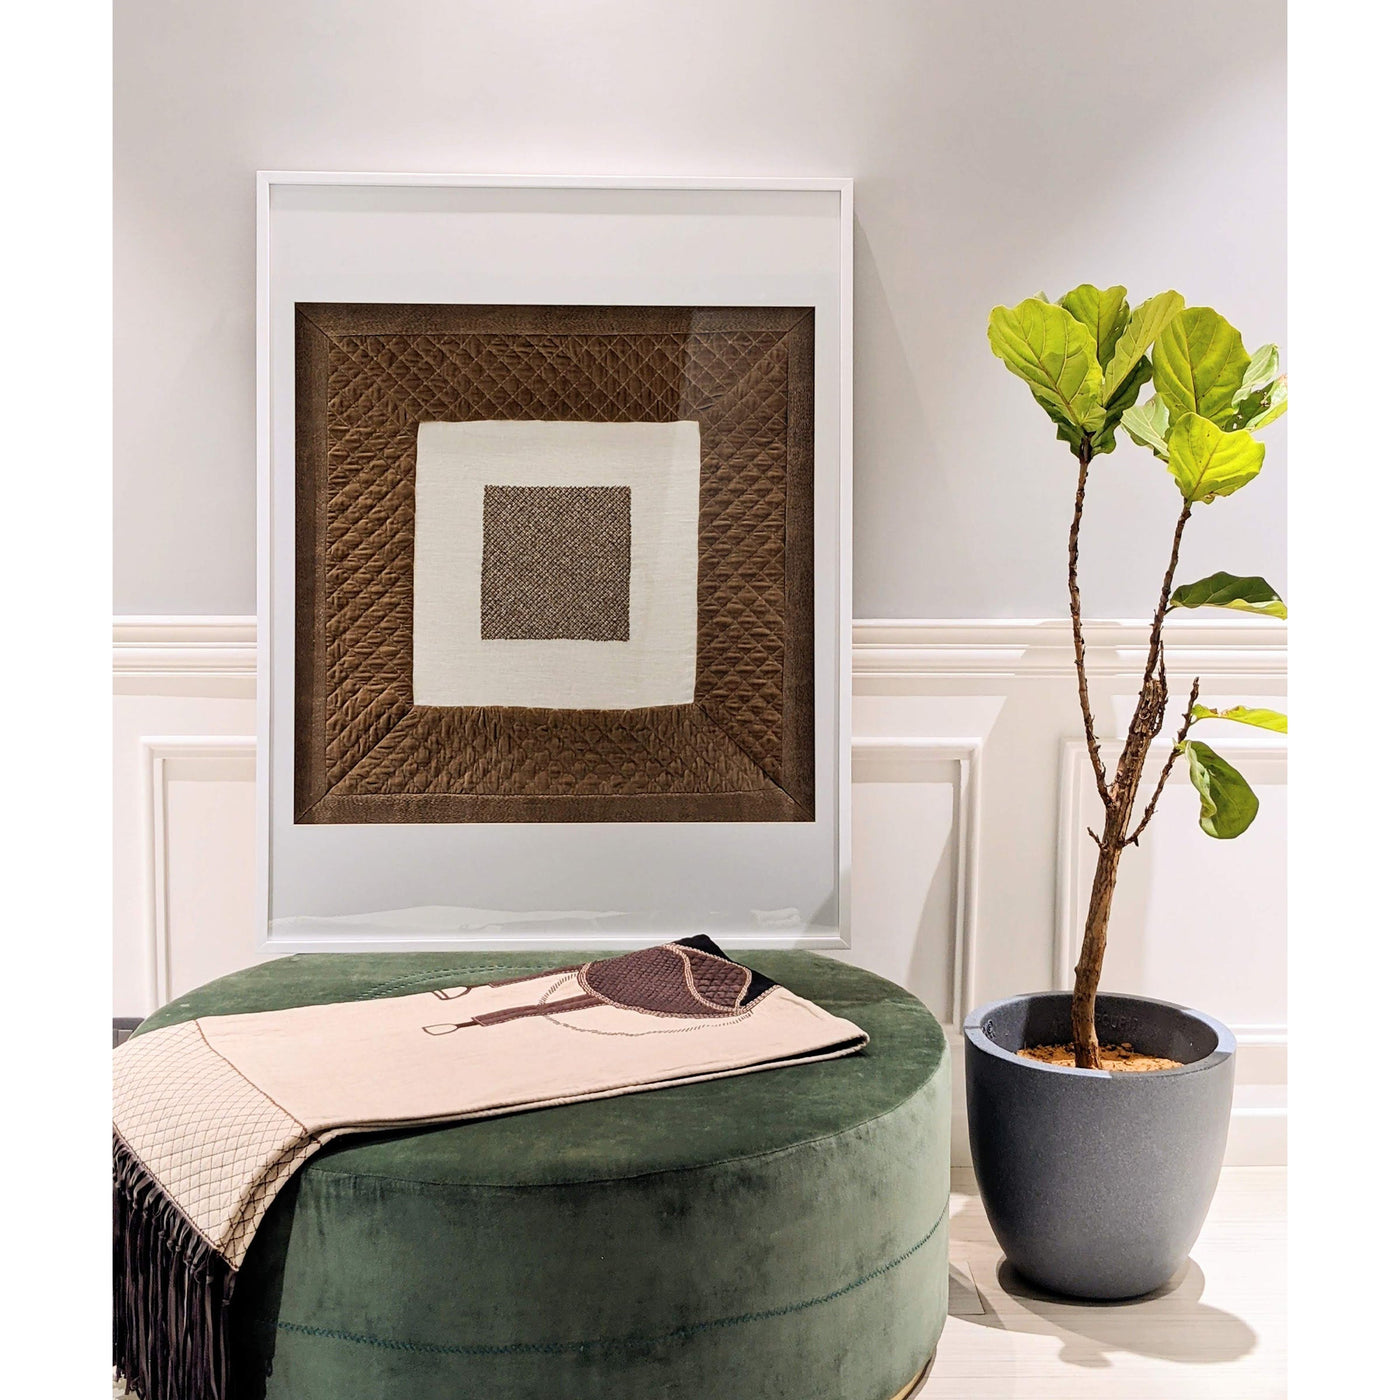 The XL Textile Art Collection by BH is focused on the best handcrafting for a statement piece. Our boxed frames have 3 dimensional depth and quality glass to preserve your artwork for years to come. 